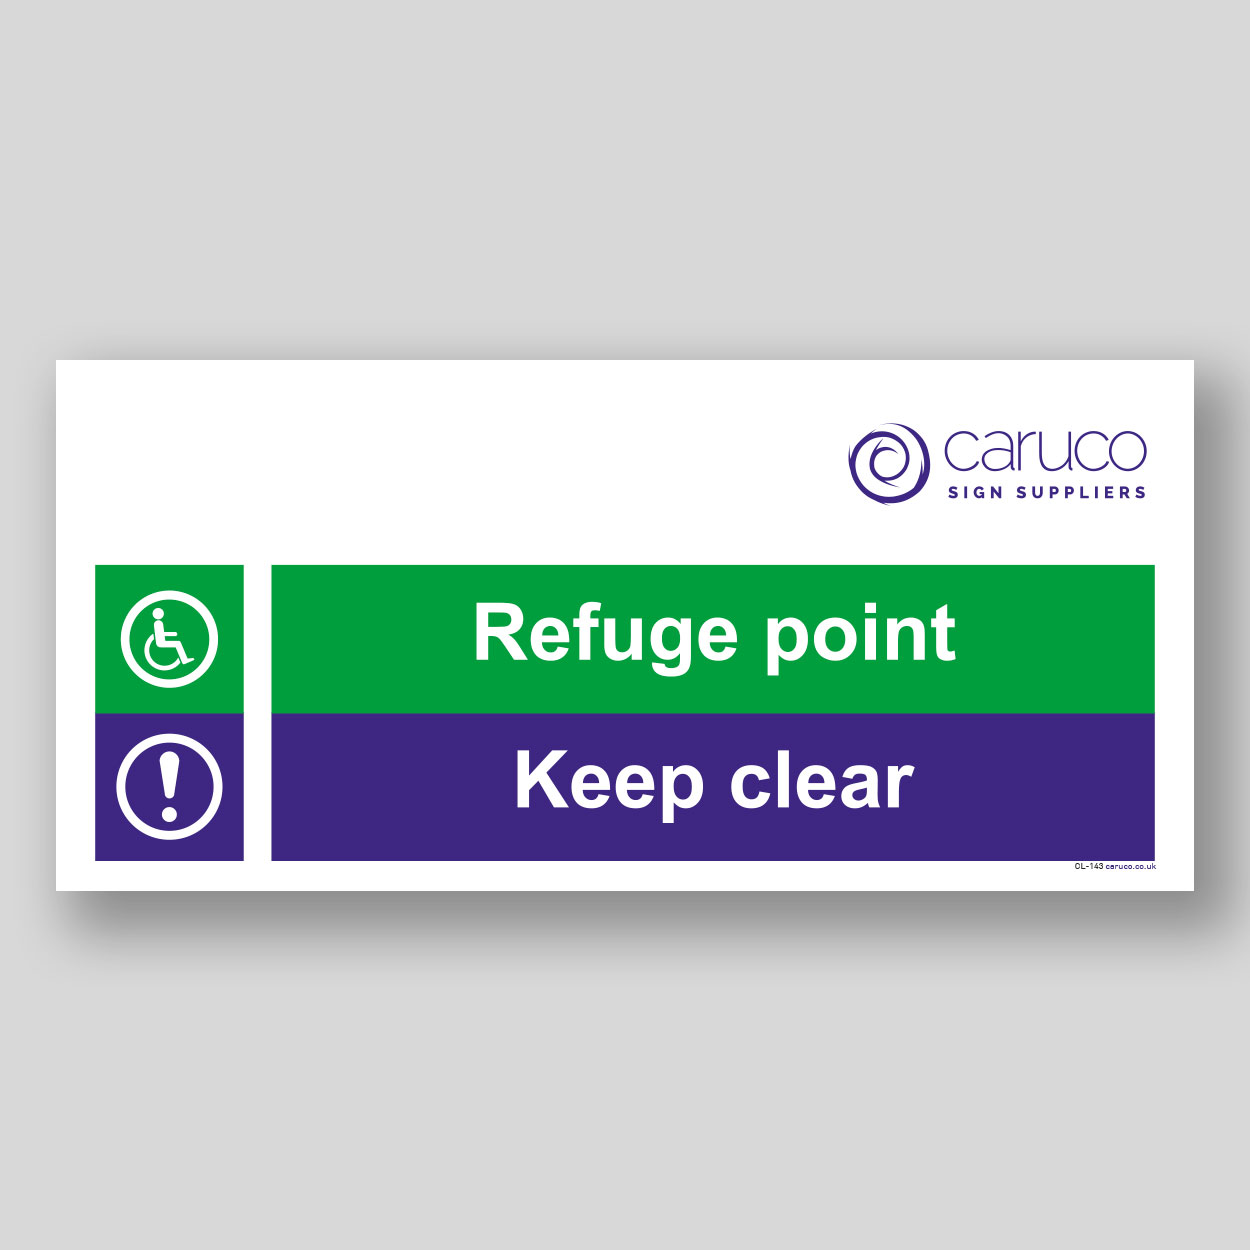 CL-143 Refuge point - keep clear